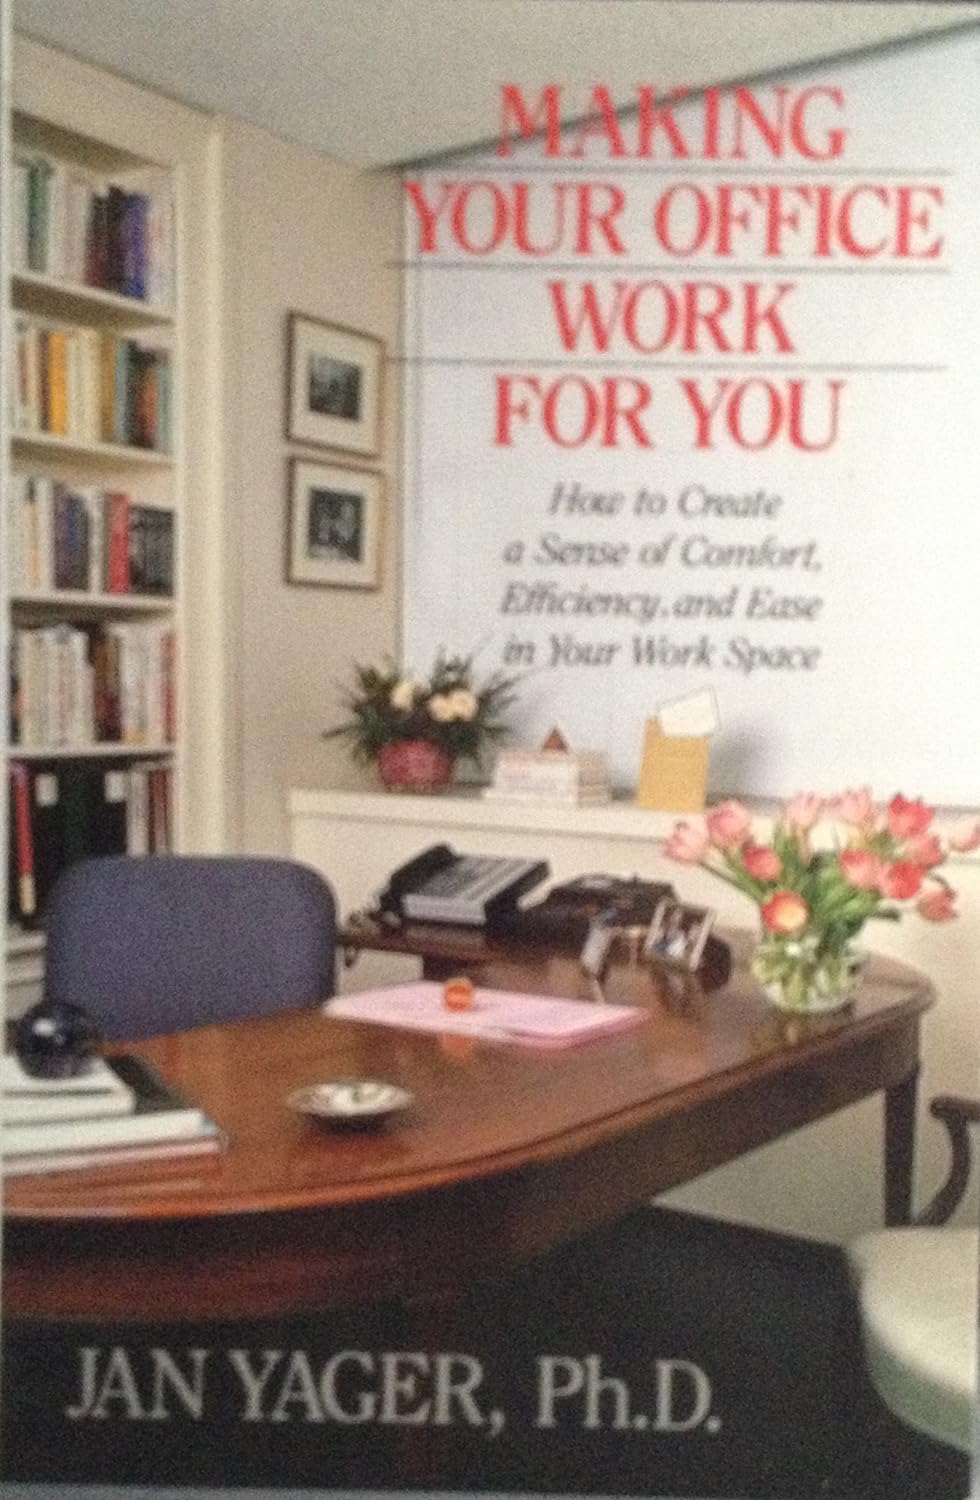 Msaking Your Office Work for You : How to create a sense of comfort, efficiency, and ease in your work space - Jan Yager